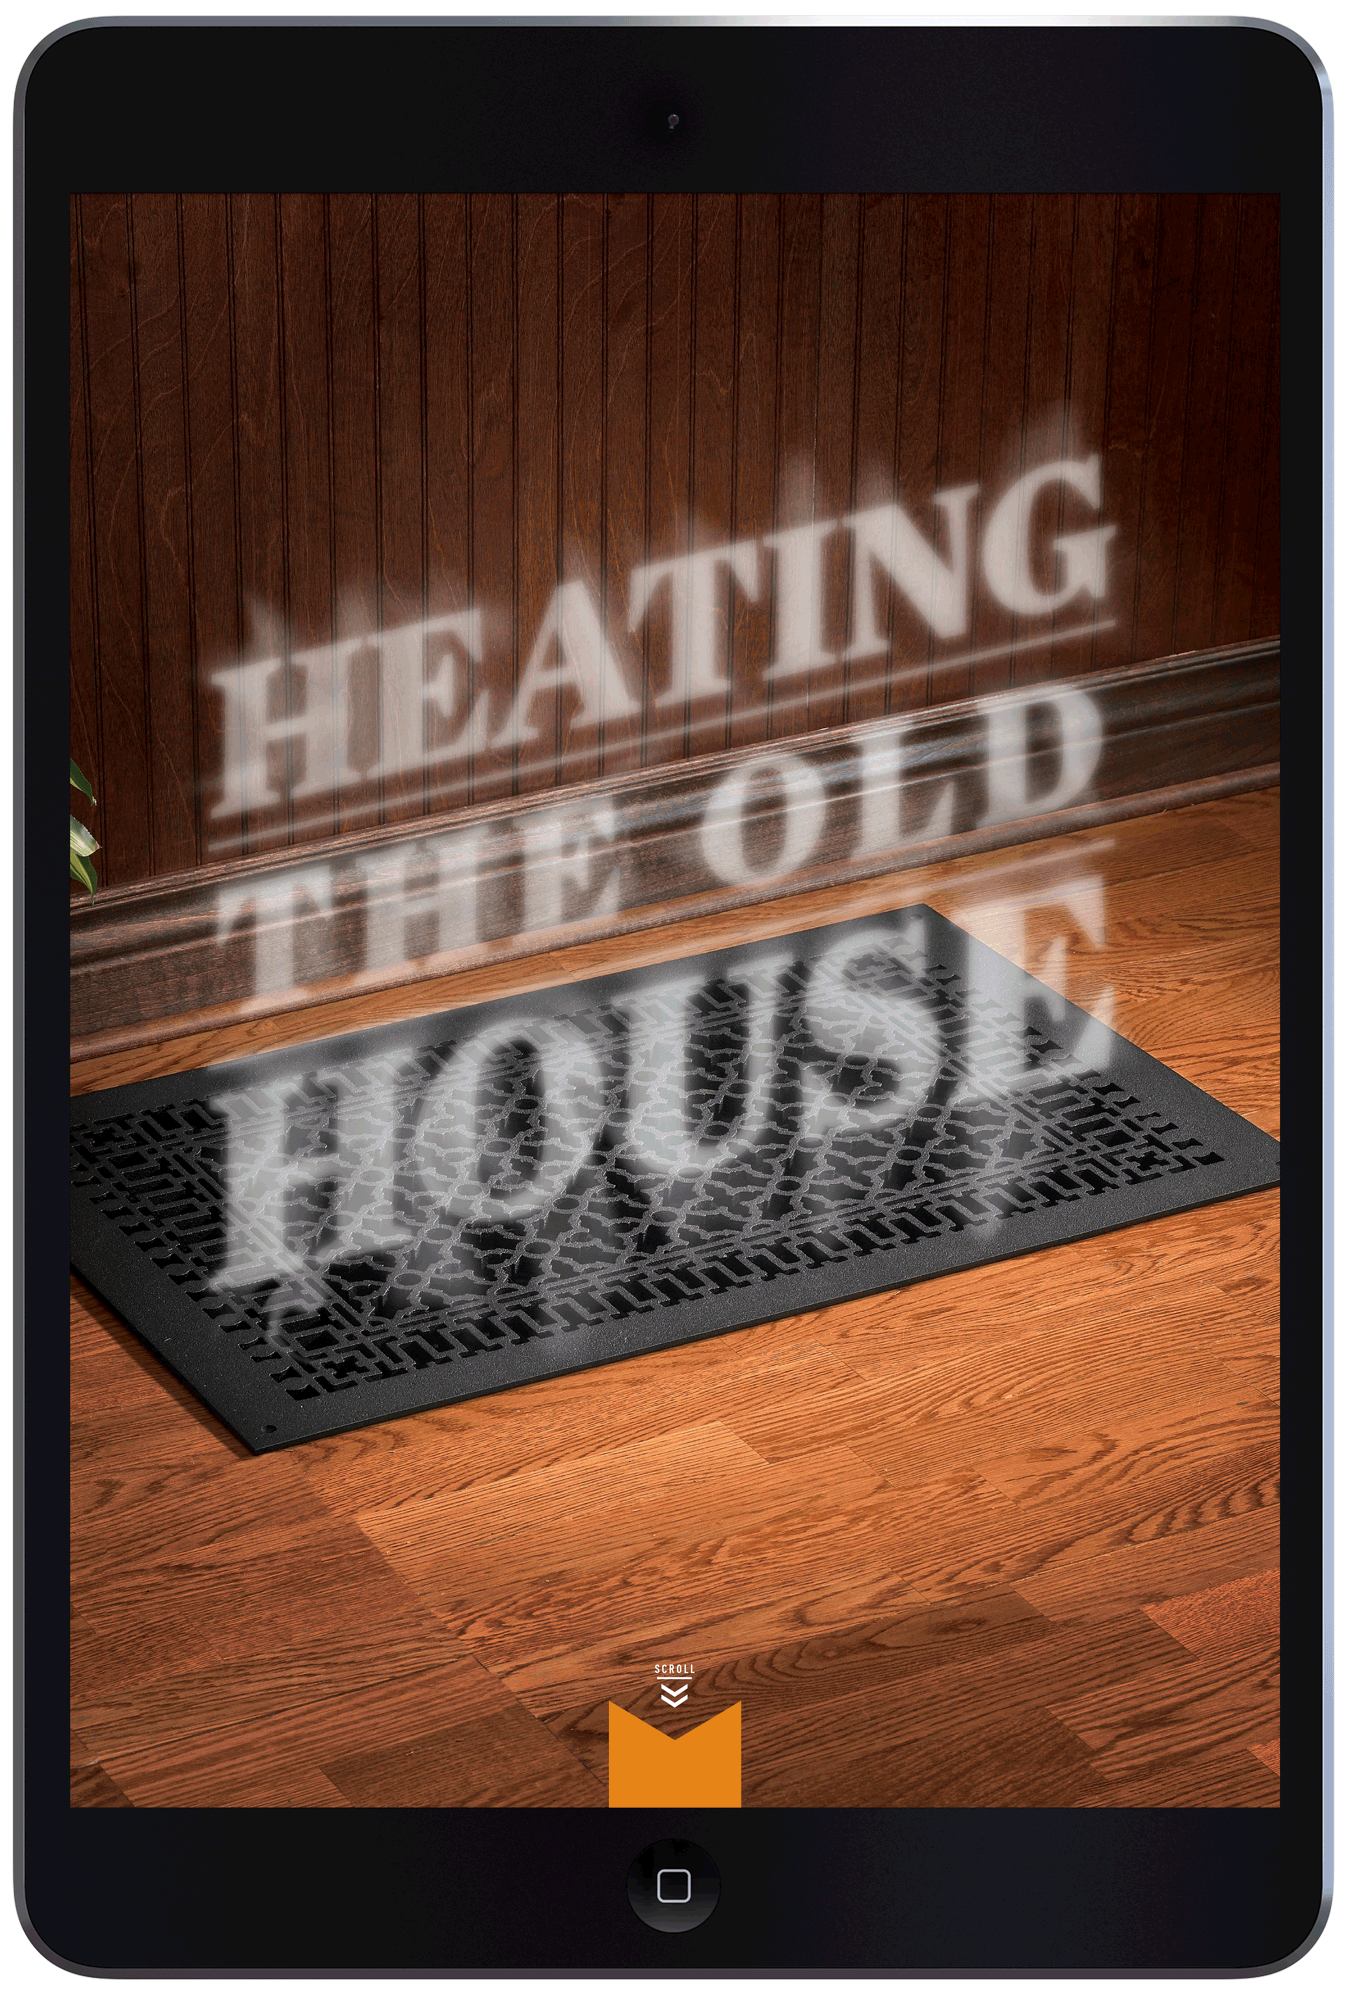 Heating the Old House by Megan Hillman 